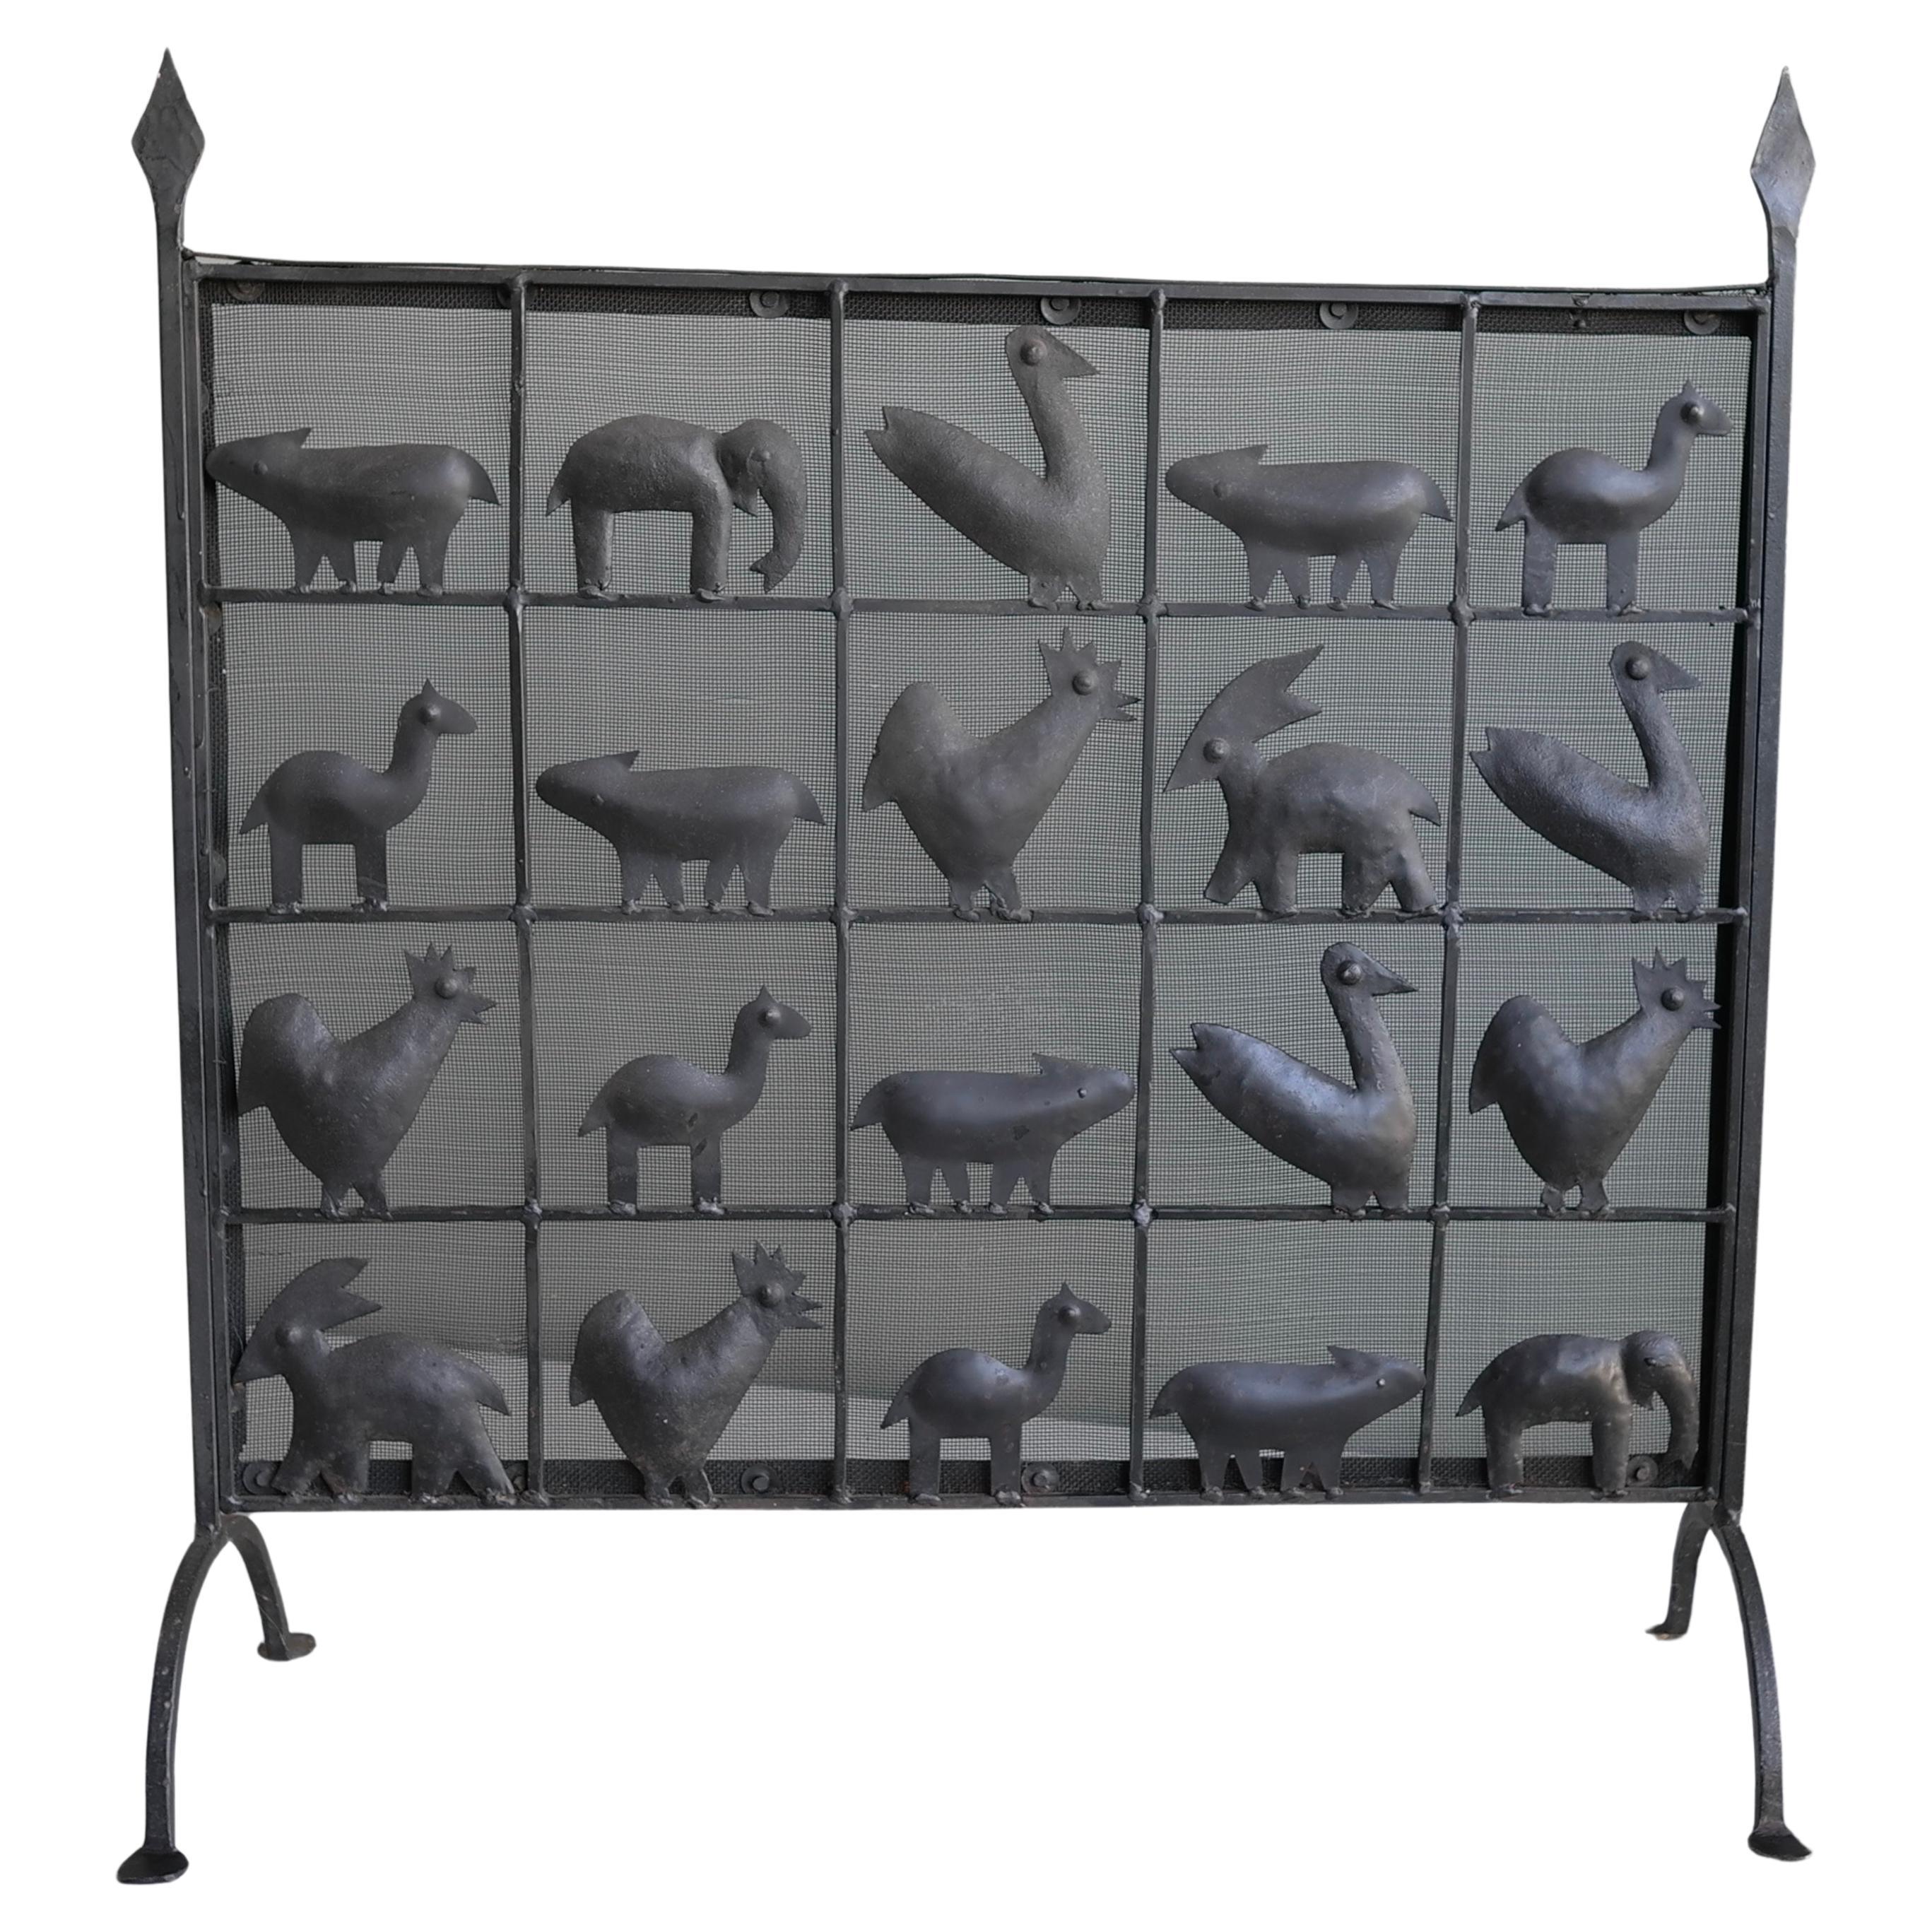 Wrought Iron Animal Fire Screen by Atelier Marolles, France, 1950's For Sale